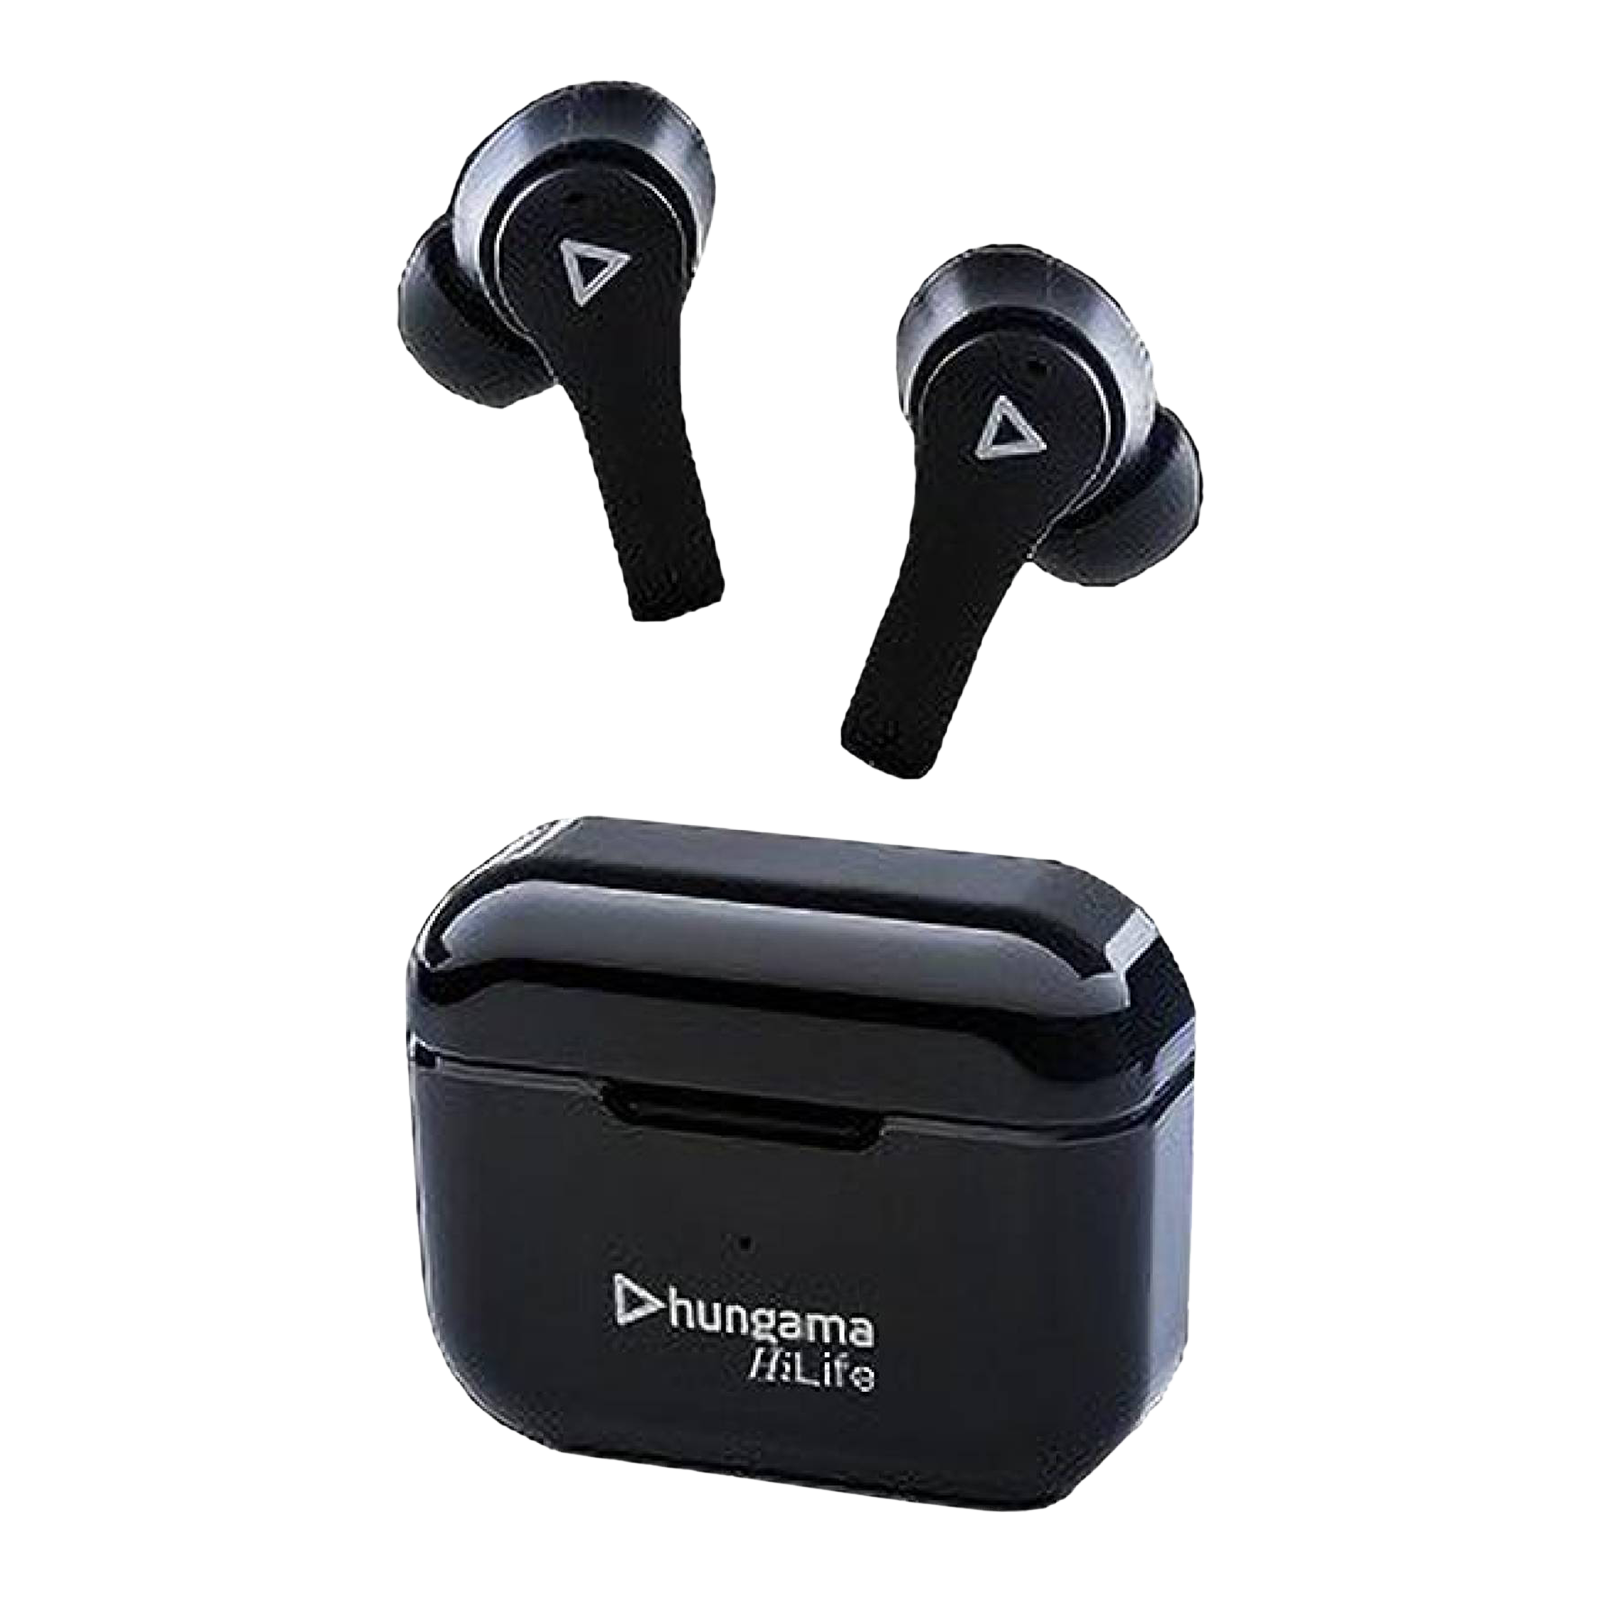 Hungama HiLife Bounce 301 TWS Earbuds (IPX4 Water & Sweat Resistant, Upto 40 Hours Playback, Black)